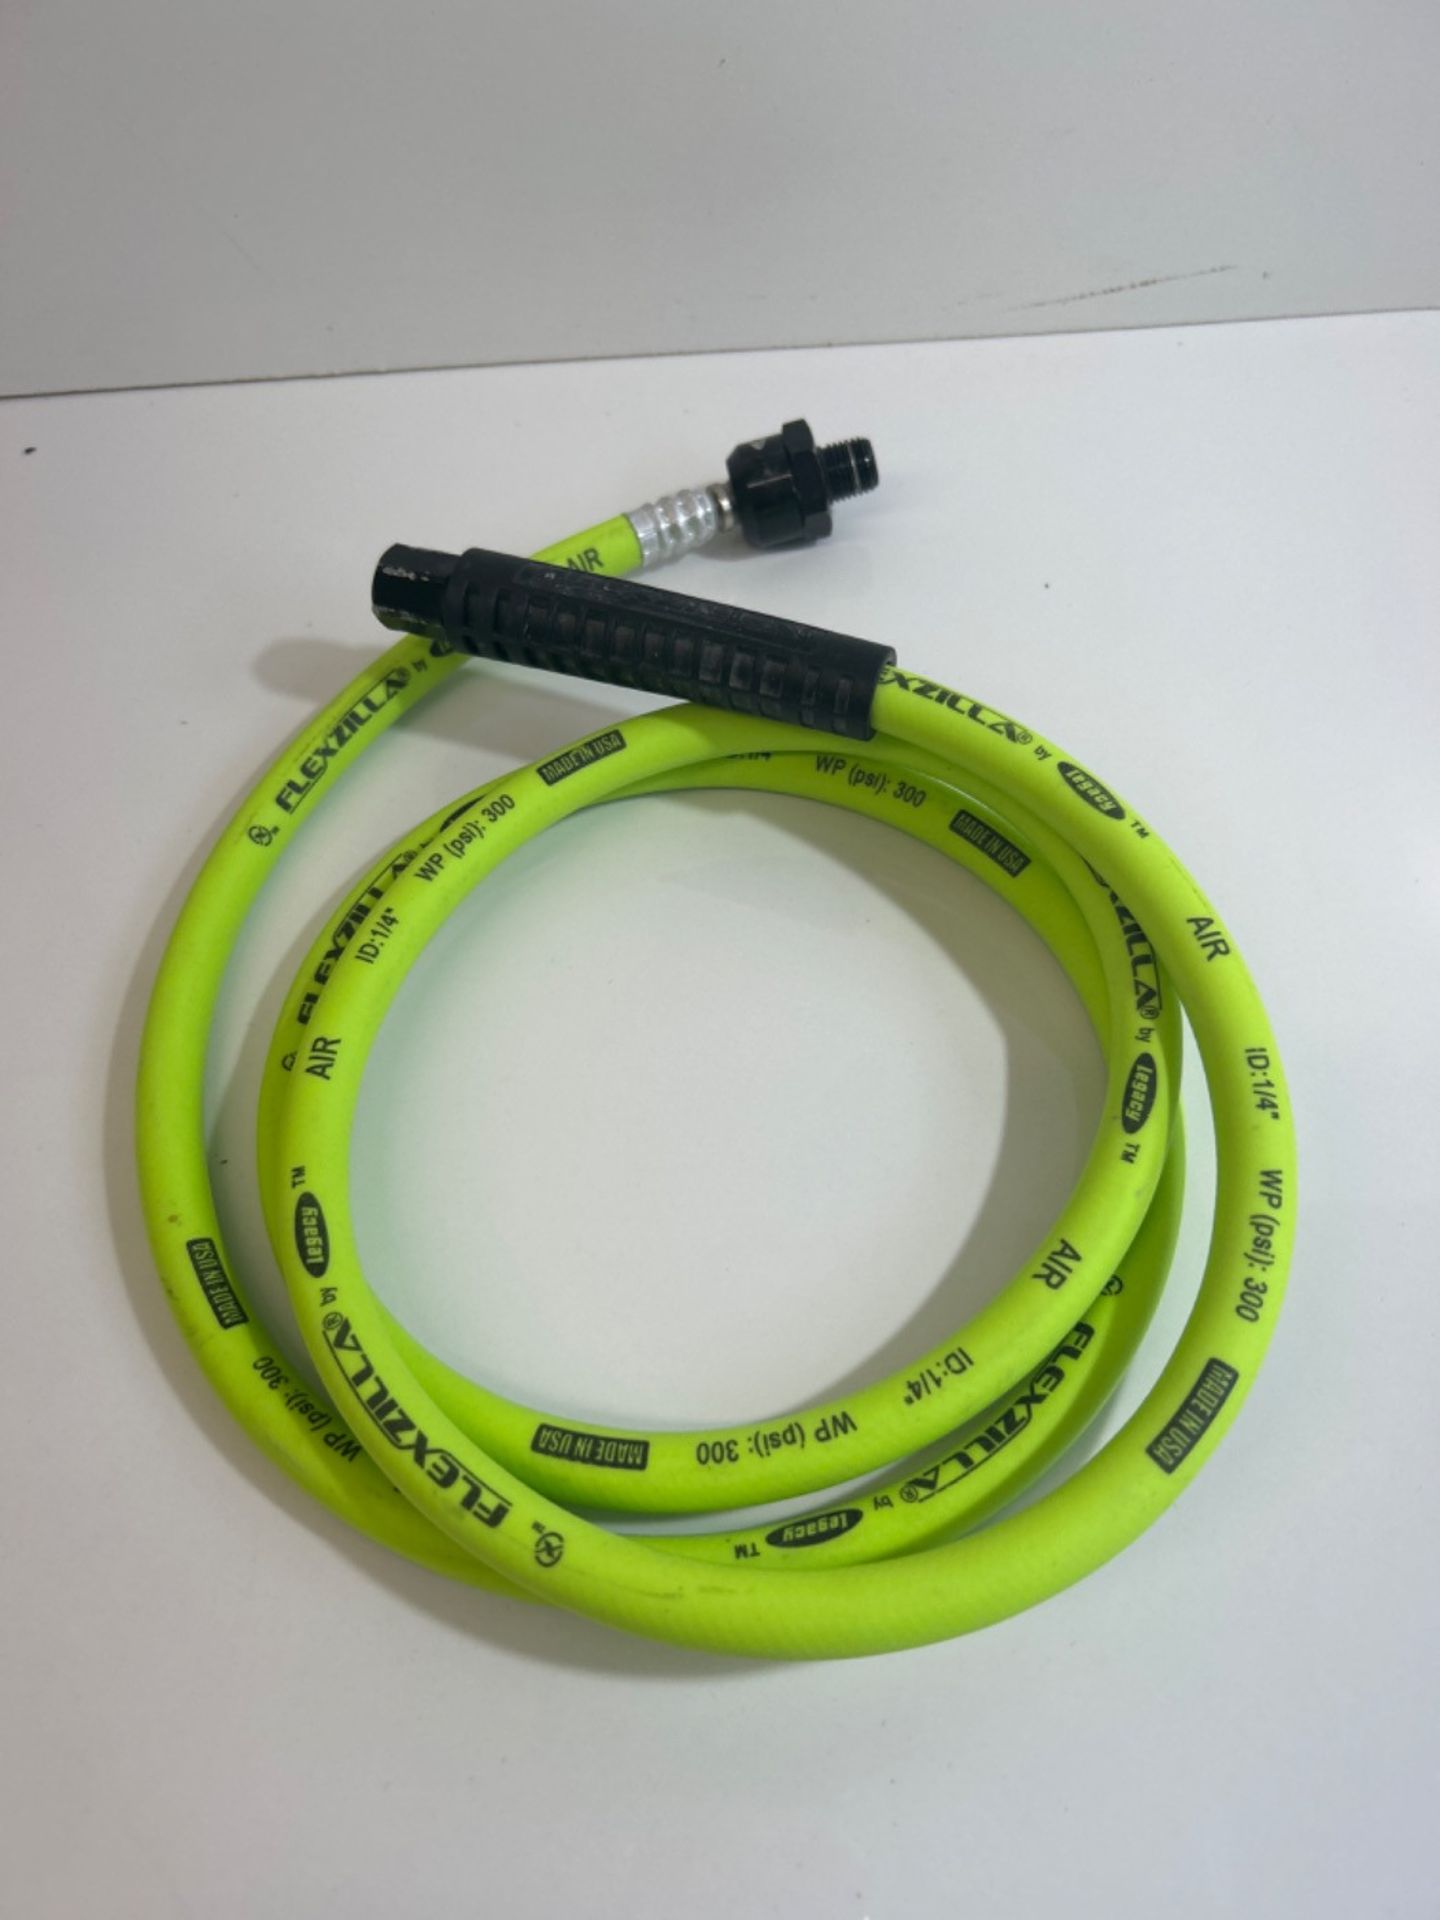 Flexzilla Ball Swivel Whip Air Hose, 1/4 in. x 4 ft. (1/4 in. MNPT Ball Swivel x 1/4 in. FNPT Ends) - Image 2 of 3